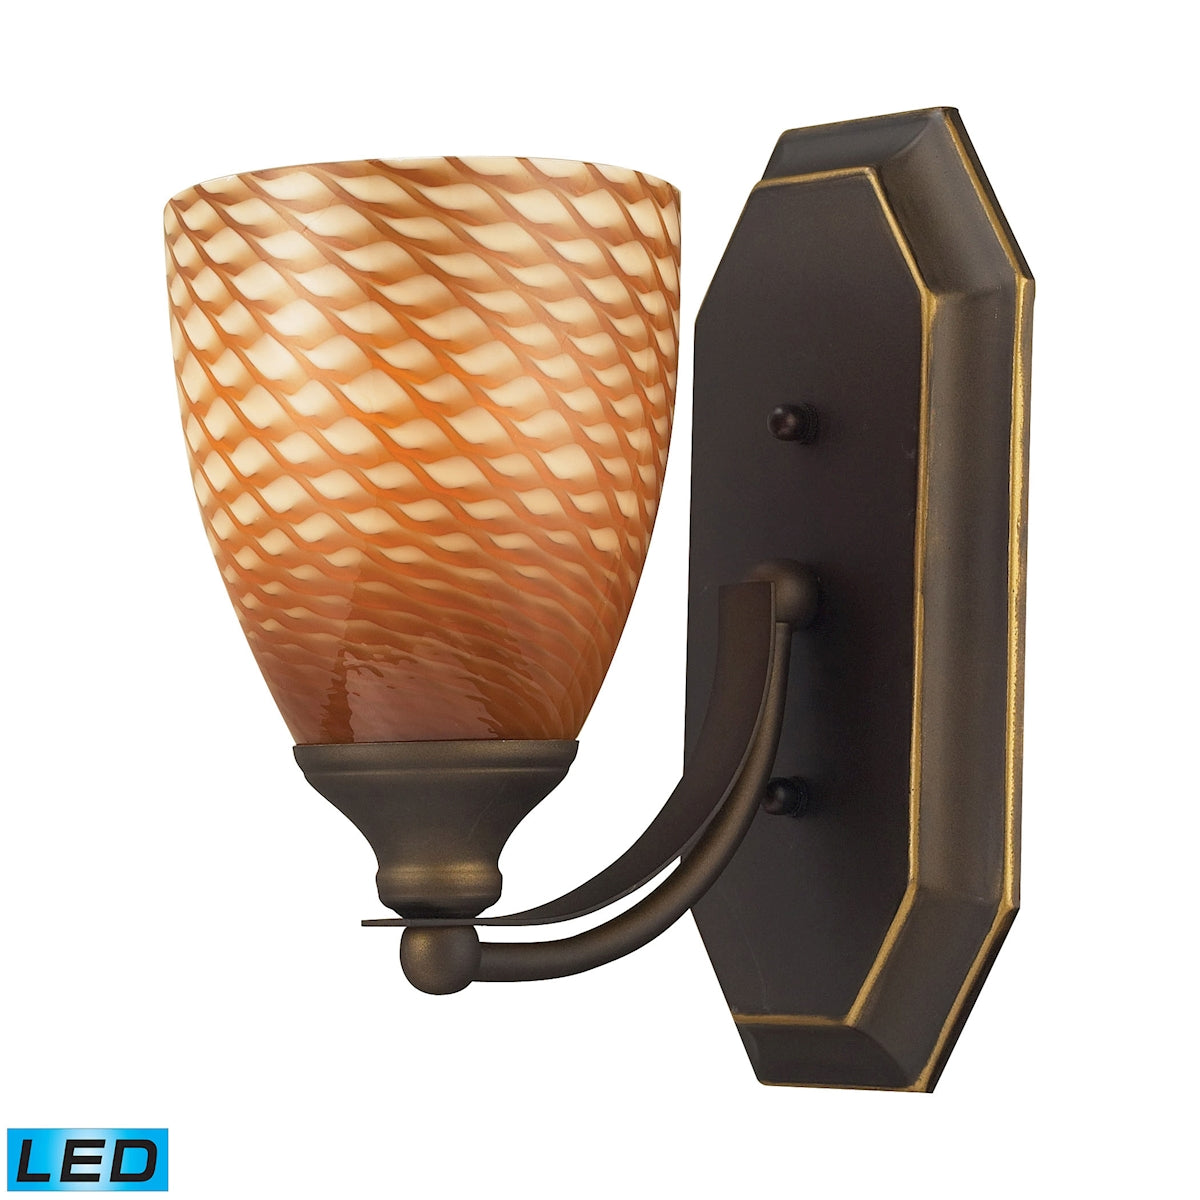 ELK Lighting 570-1B-C-LED Mix-N-Match Vanity 1-Light Wall Lamp in Aged Bronze with Cocoa Glass - Includes LED Bulb